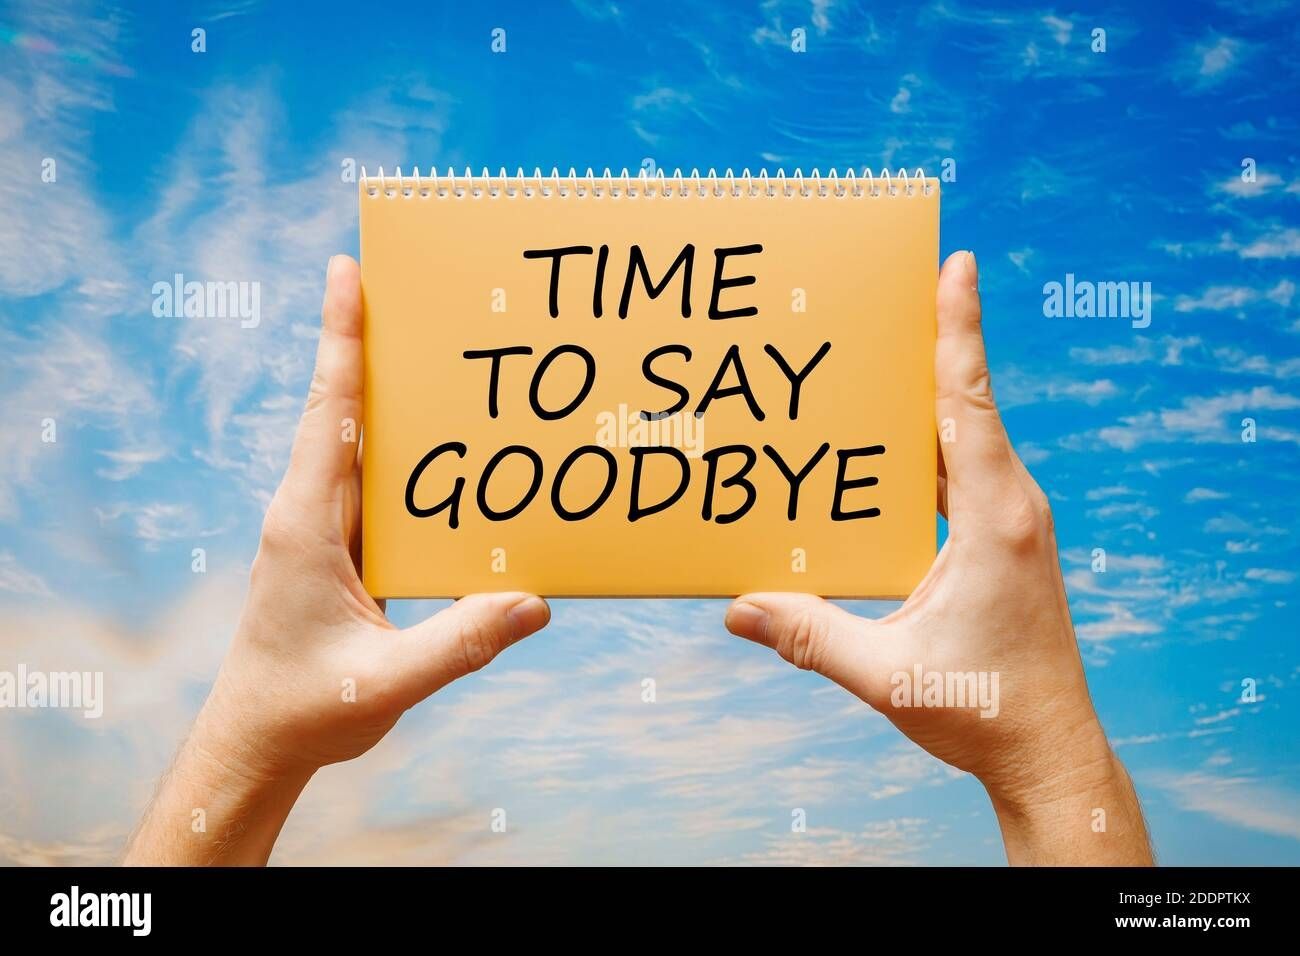 man-holding-a-card-with-text-time-to-say-goodbye-on-the-background-of-a-blue-sky-2DDPTKX.jpg